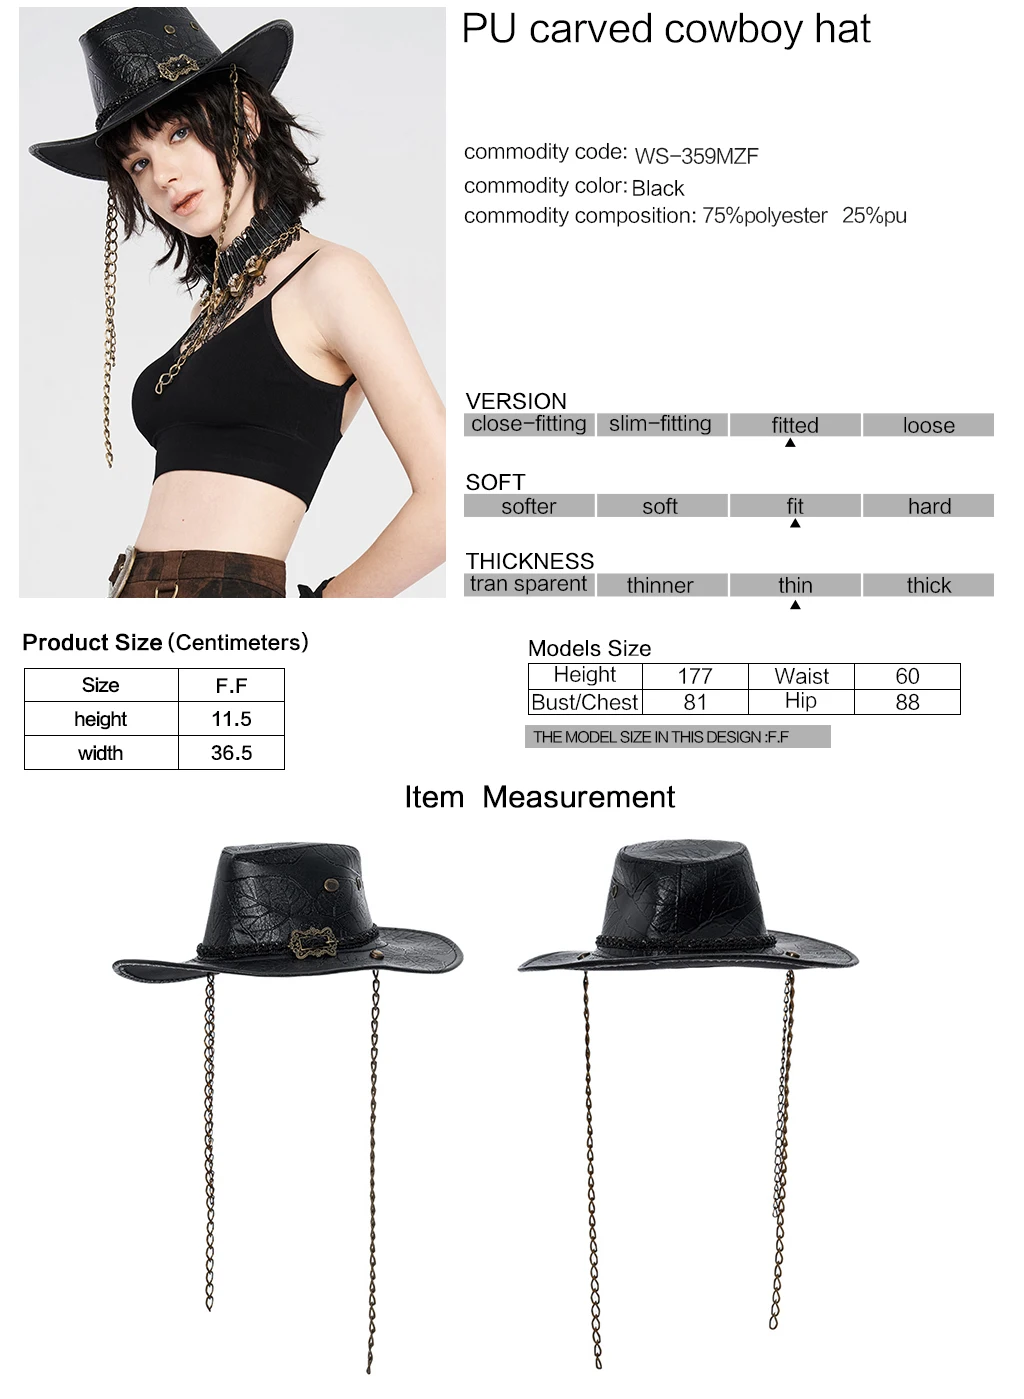 PUNKRAVE Women's PU Carved Cowboy Hat Punk Handsome Fashion Personality Stage Performance Club Cap 